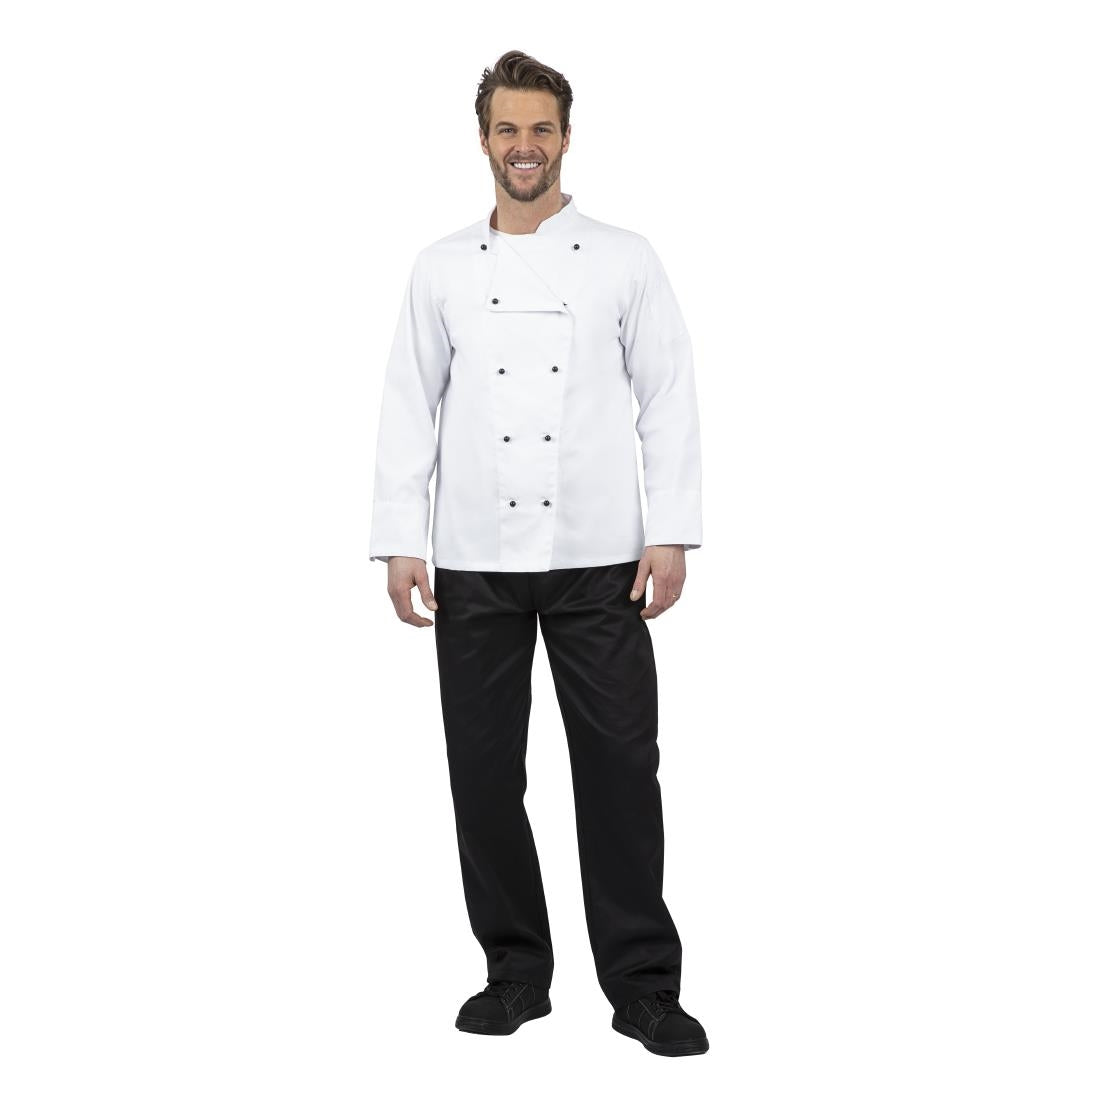 DL710-L Whites Chicago Unisex Chefs Jacket Long Sleeve L JD Catering Equipment Solutions Ltd